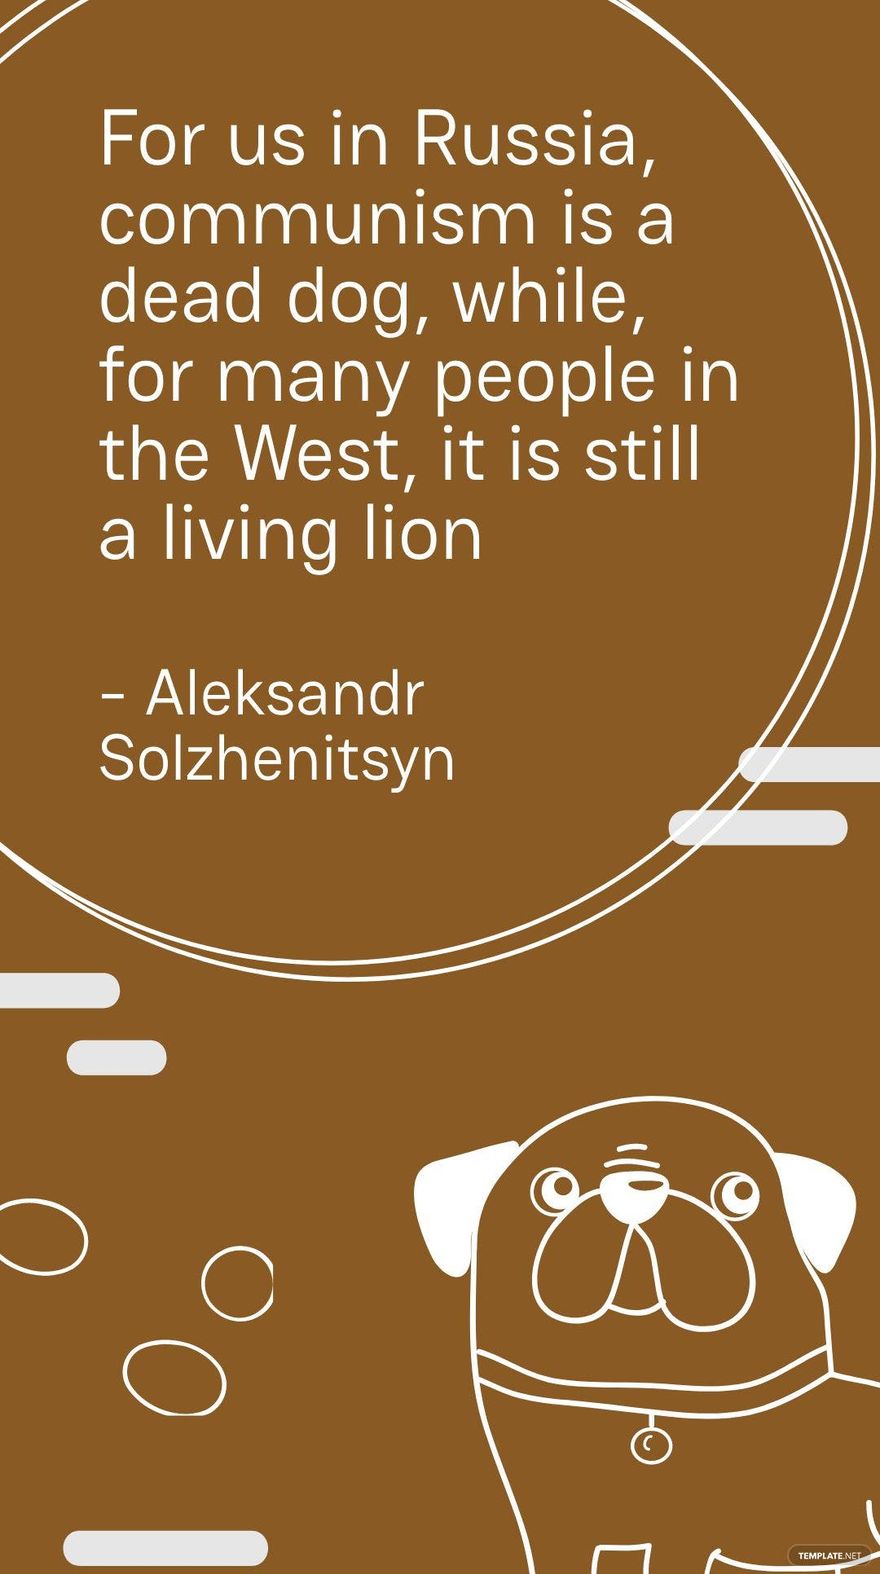 Free Aleksandr Solzhenitsyn - For us in Russia, communism is a dead dog, while, for many people in the West, it is still a living lion